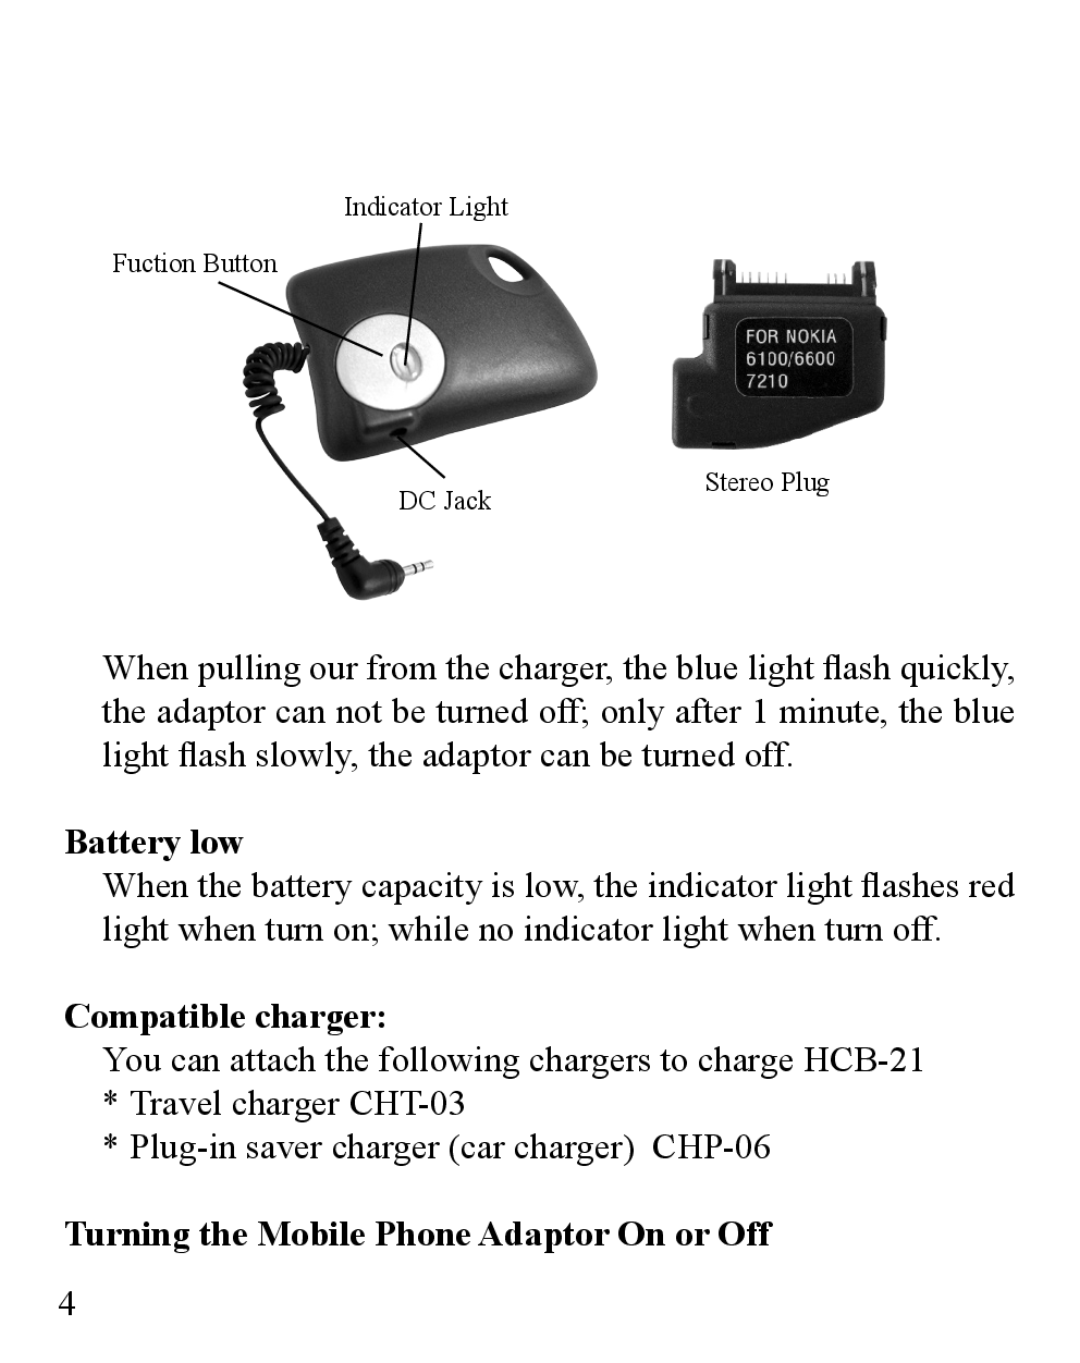 Huey Chiao HCB-21 manual Battery low, Compatible charger, Turning the Mobile Phone Adaptor On or Off 